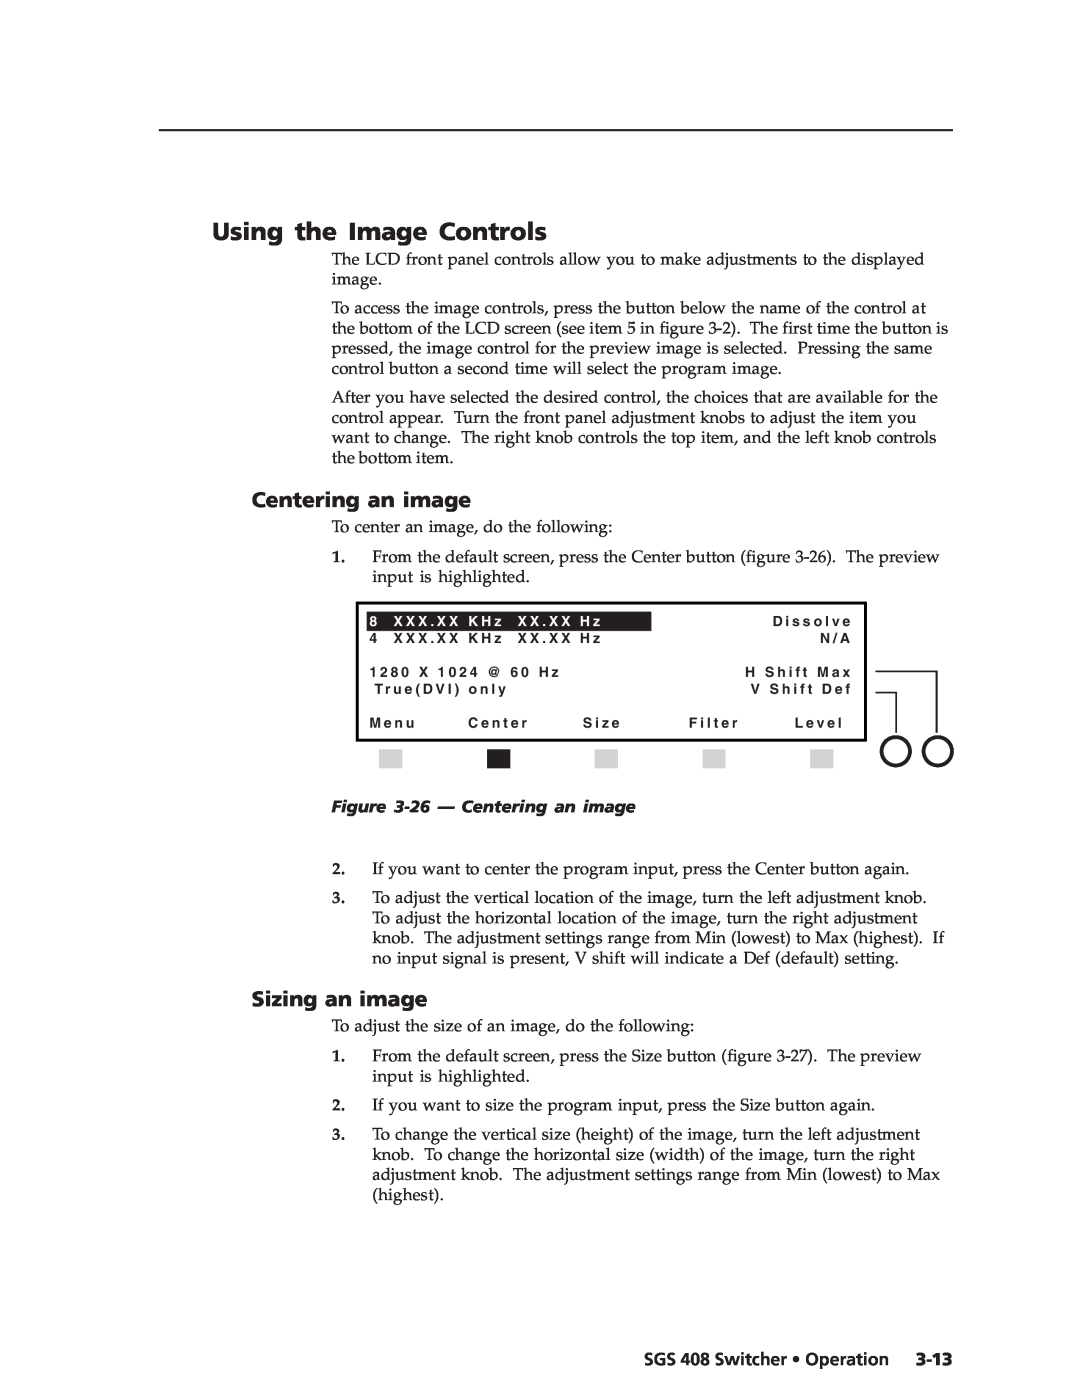 Extron electronic SGS 408 manual Using the Image Controls, Sizing an image, 26 - Centering an image 